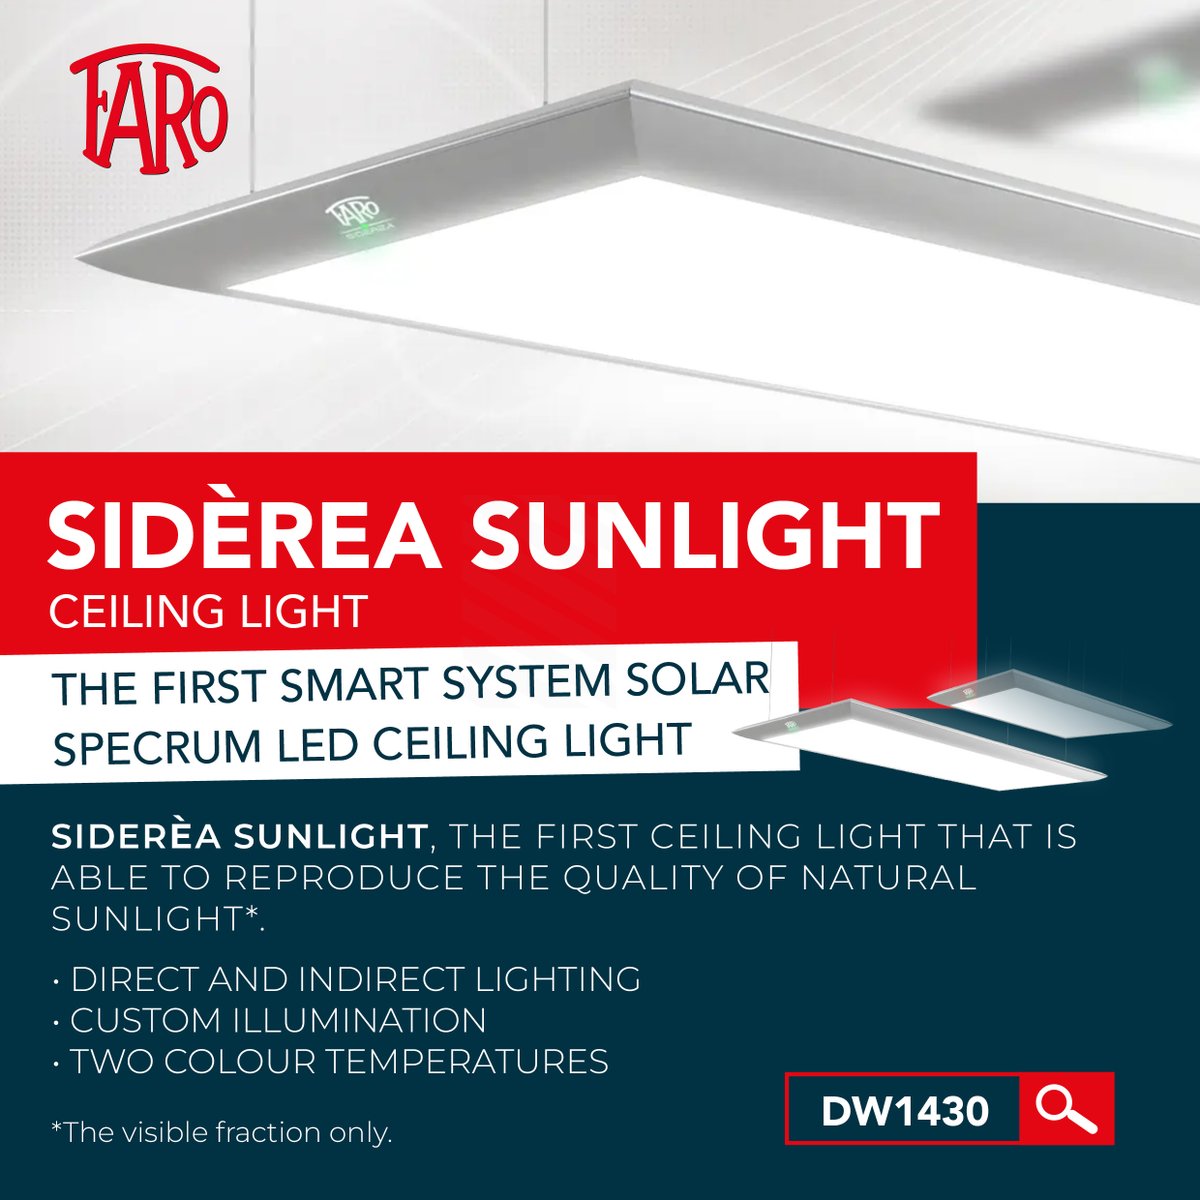 TECHNOLOGY INNOVATION AND WELLBEING
Discover the Faro SIDERÈA SUNLIGHT, a multi-directional light that achieves an illumination that is always homogeneous and proportional to the environment, avoiding both shadow areas as well as a “cave” effect.

#dentalpractice #faro